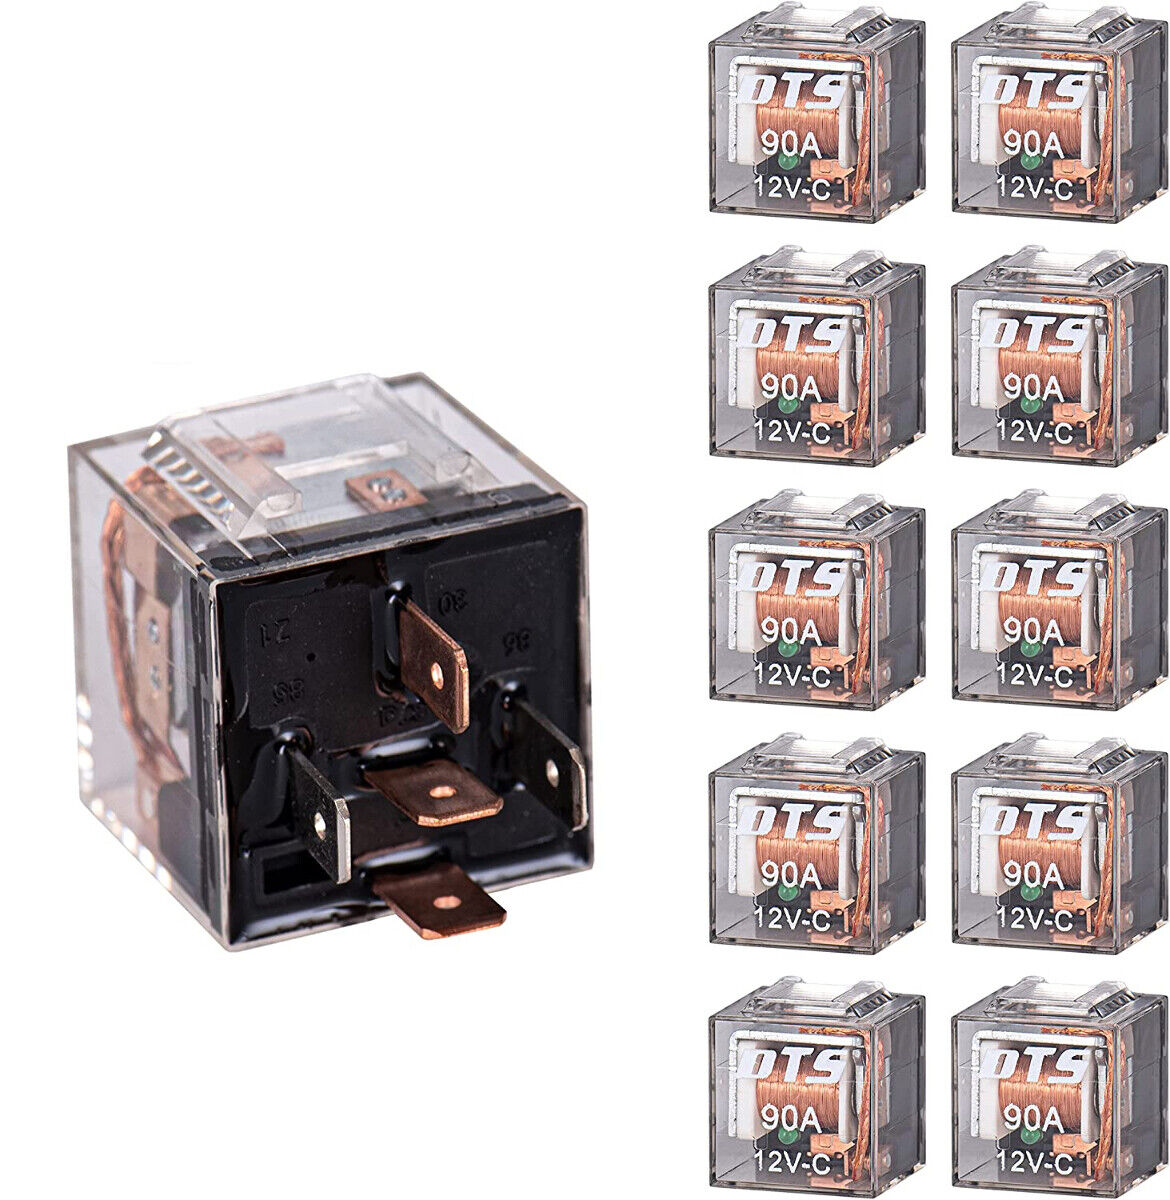 New Set of 10pcs Relay 5 Pin 12v 90 Amp (87a-87) WITH LED